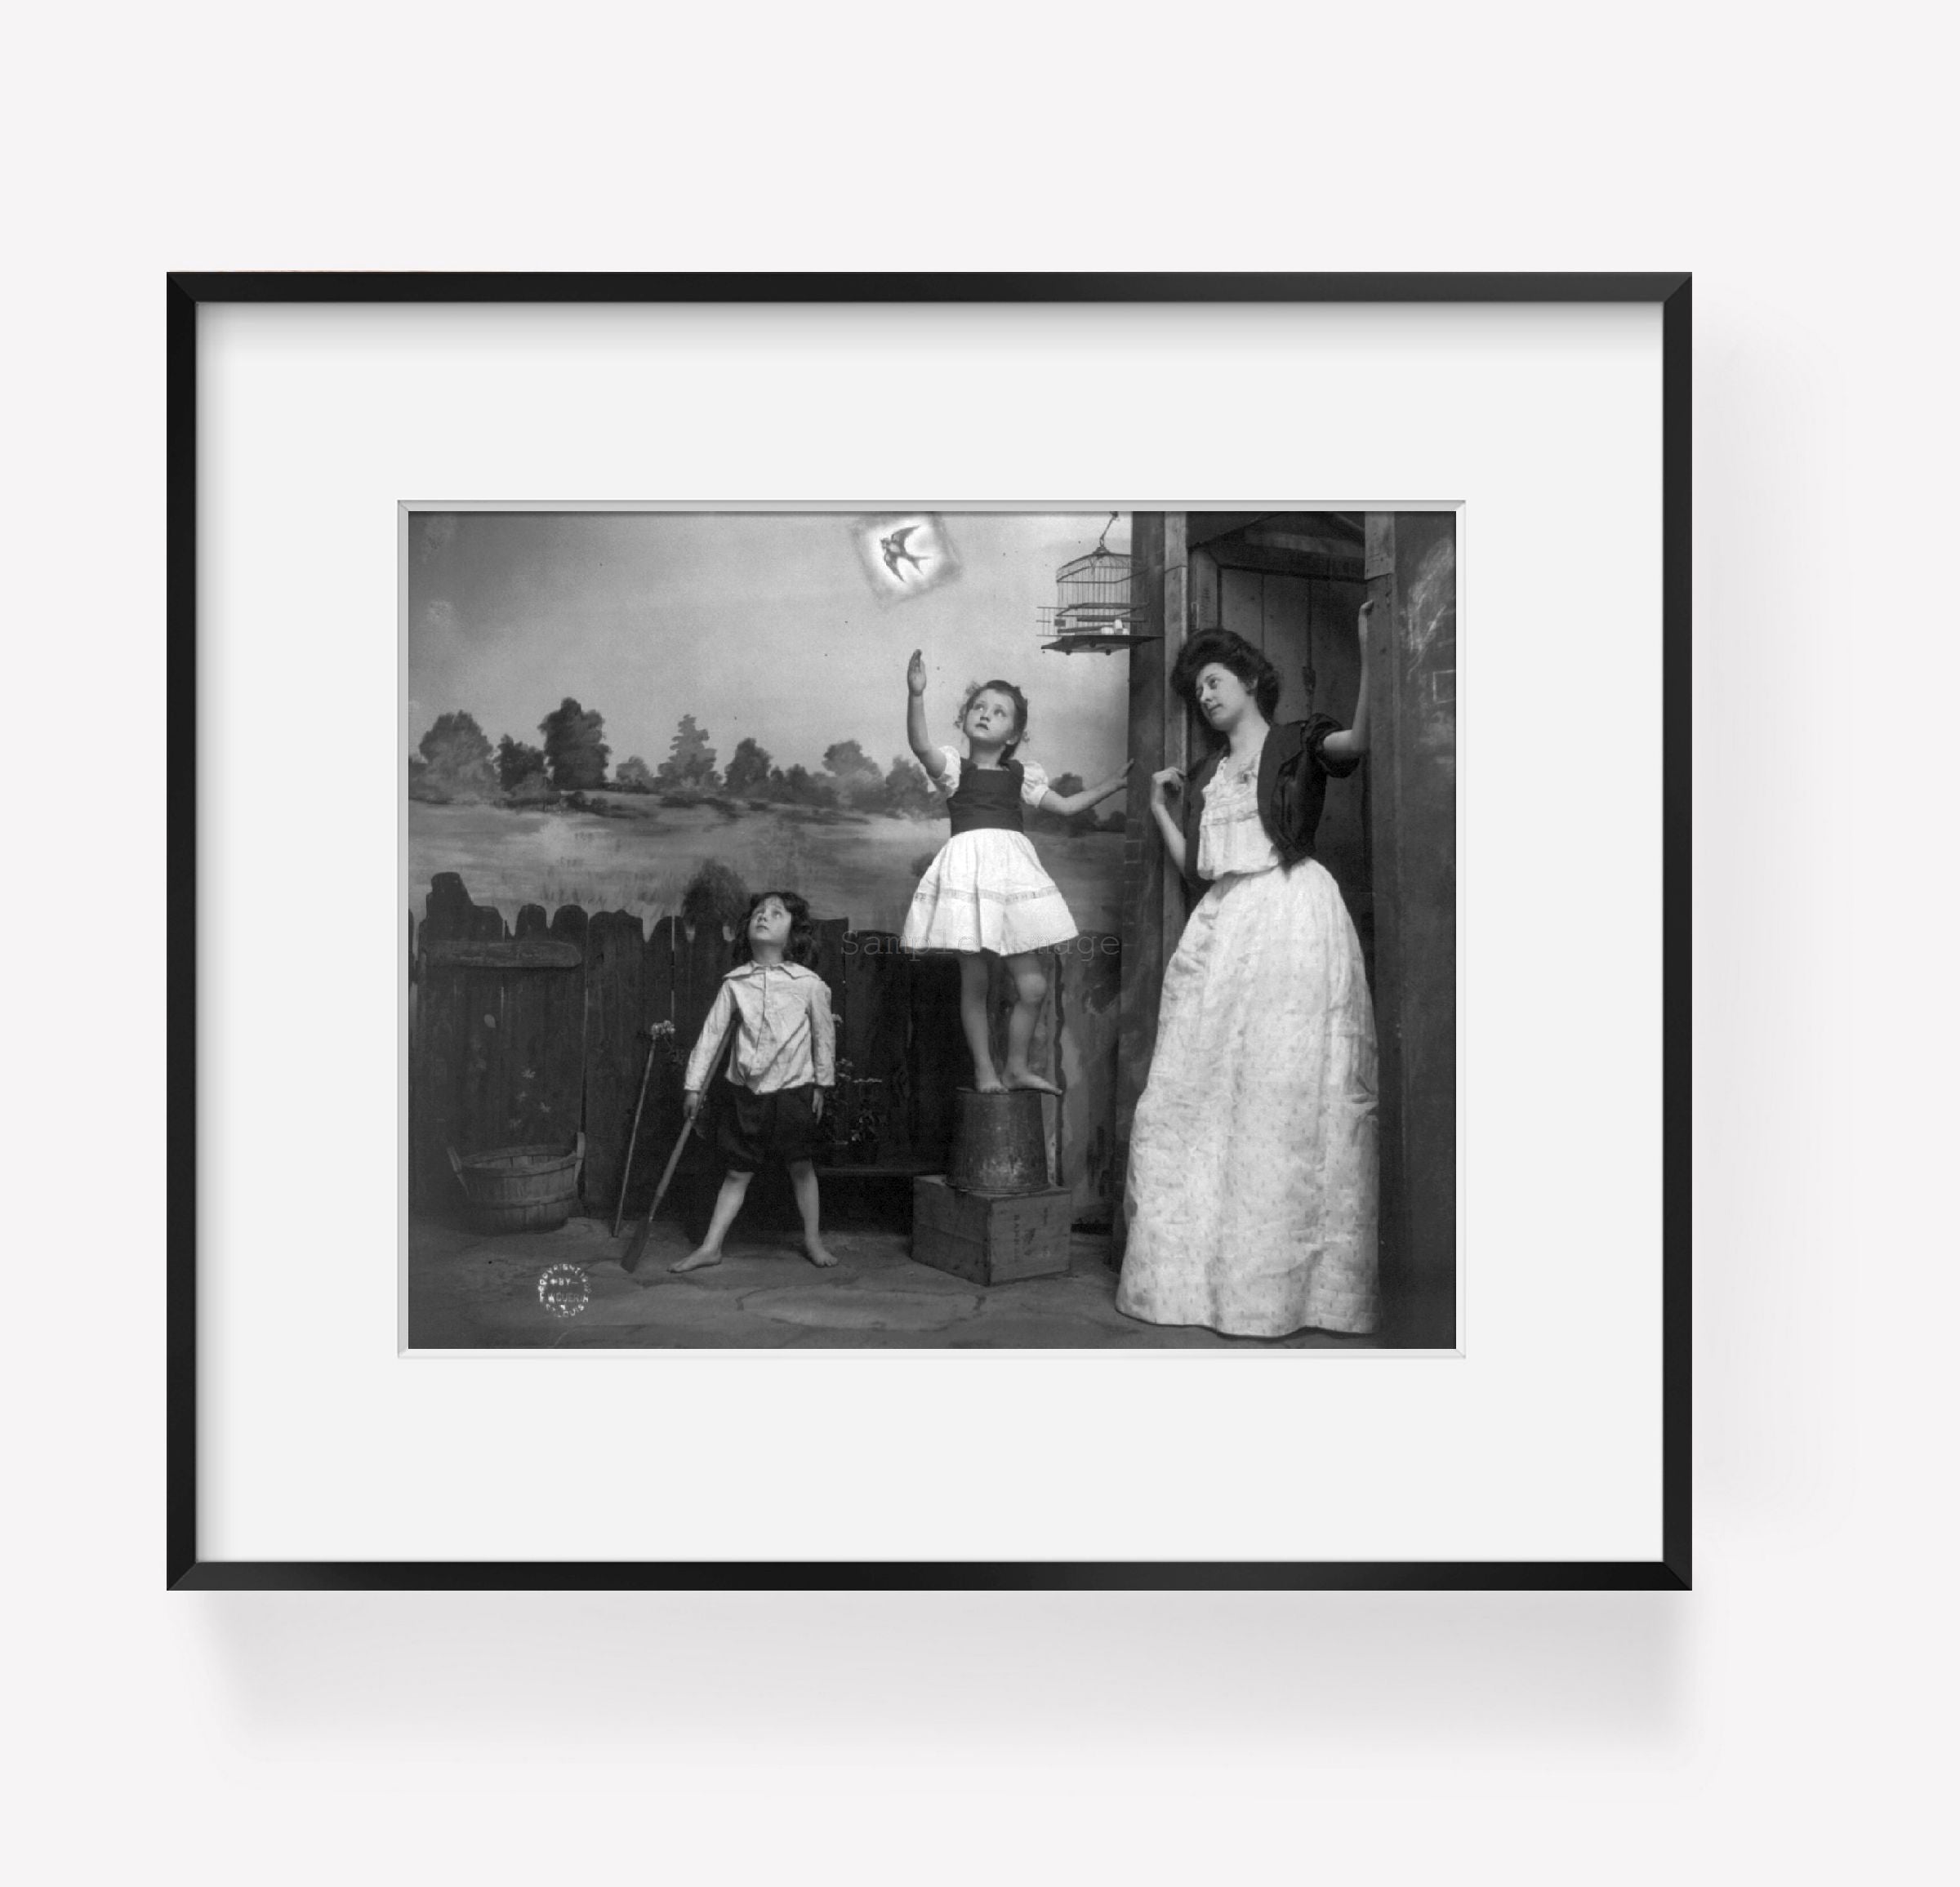 ca. 1900-10 photograph of Woman and 2 children watching bird fly from cage